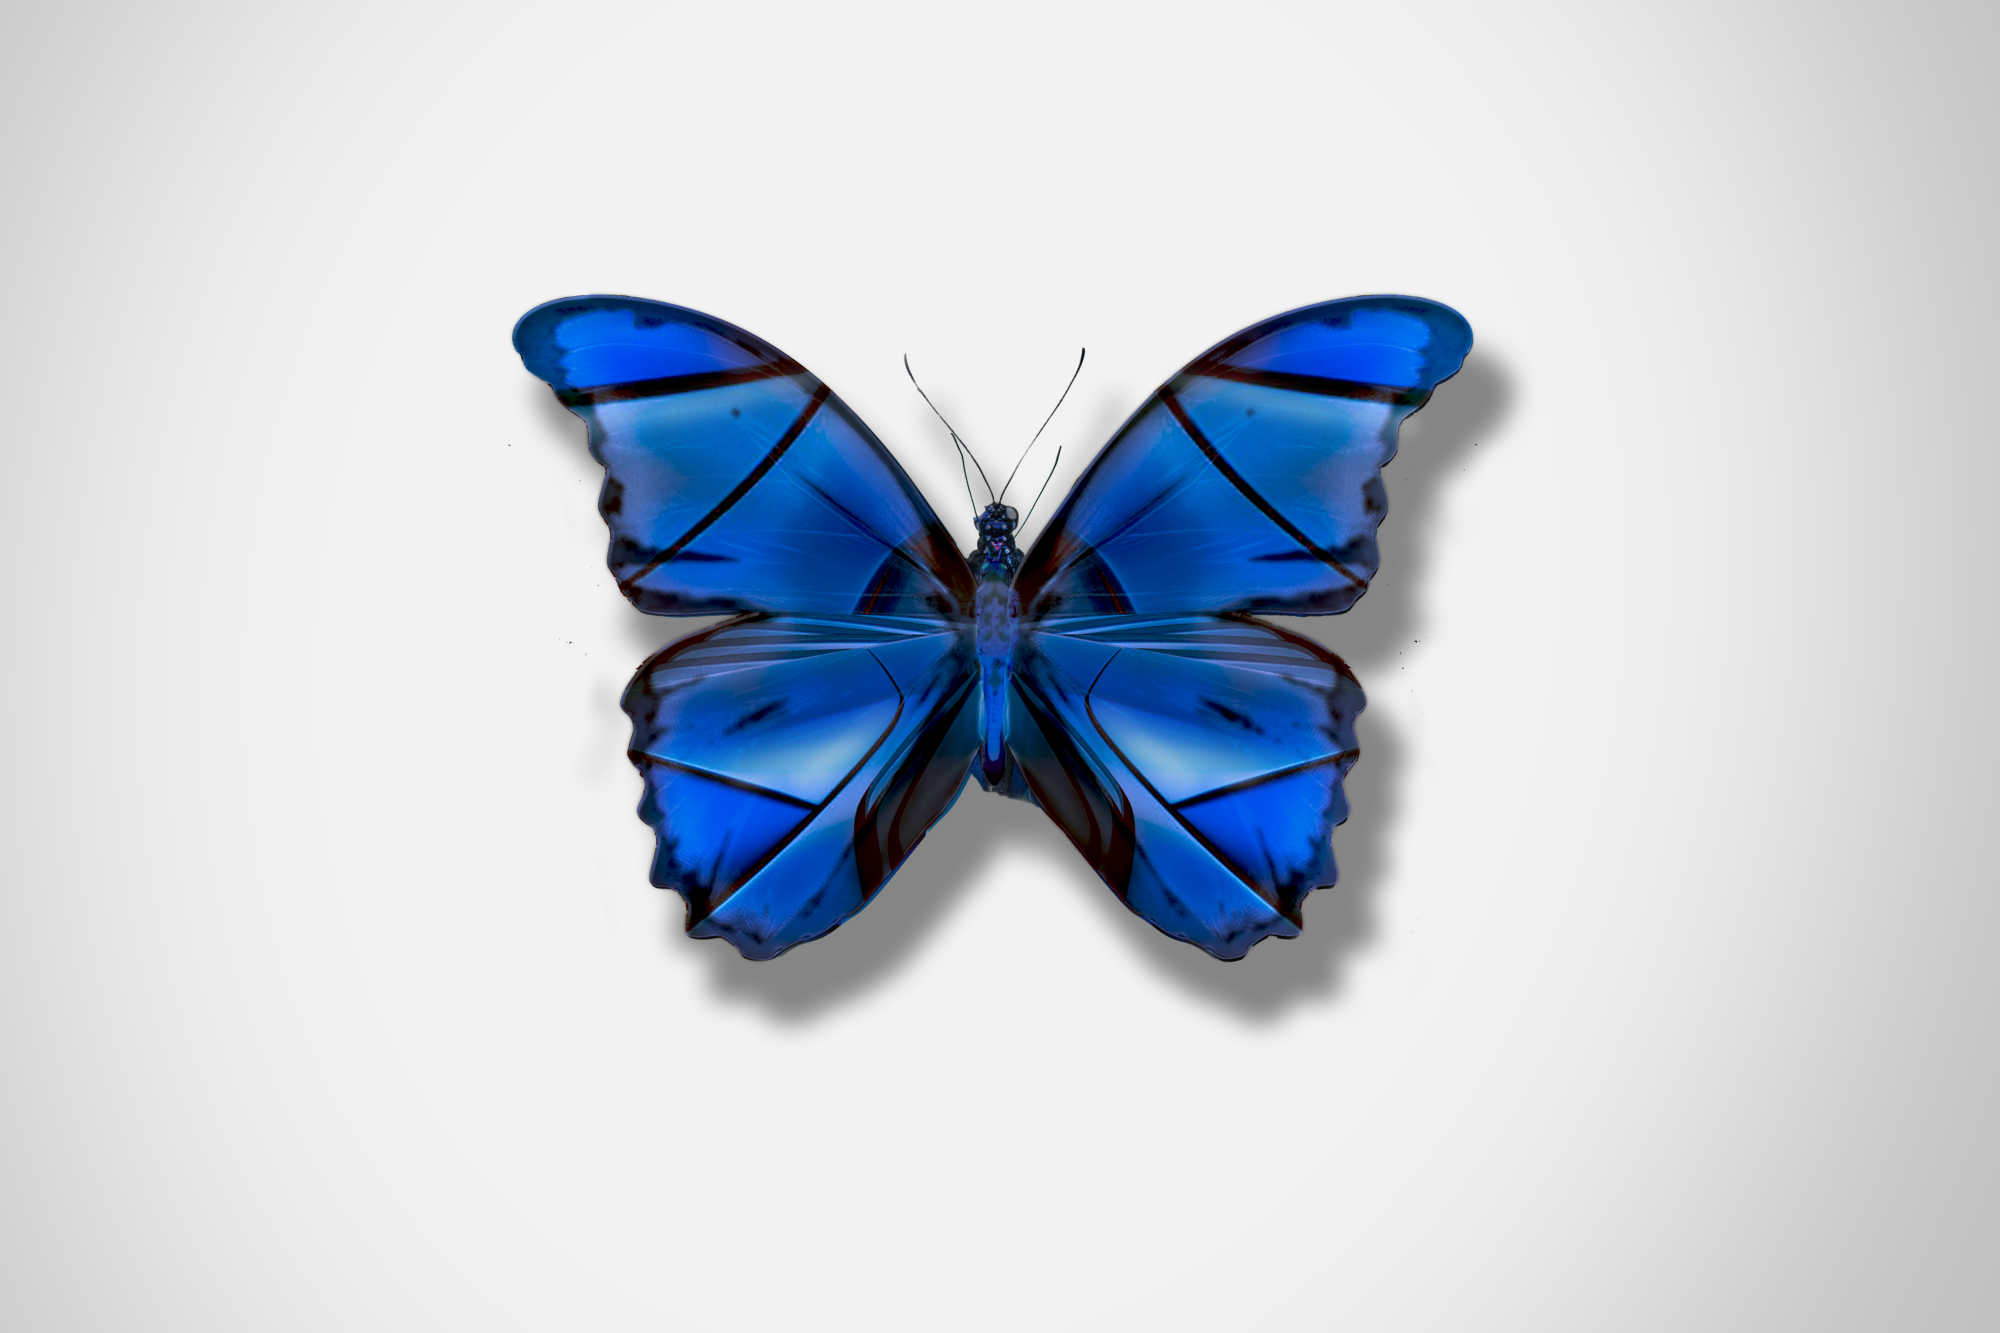 Ford_Butterflies_Concept_The_Beauty_Of_Change_DKLG_Design_000.png